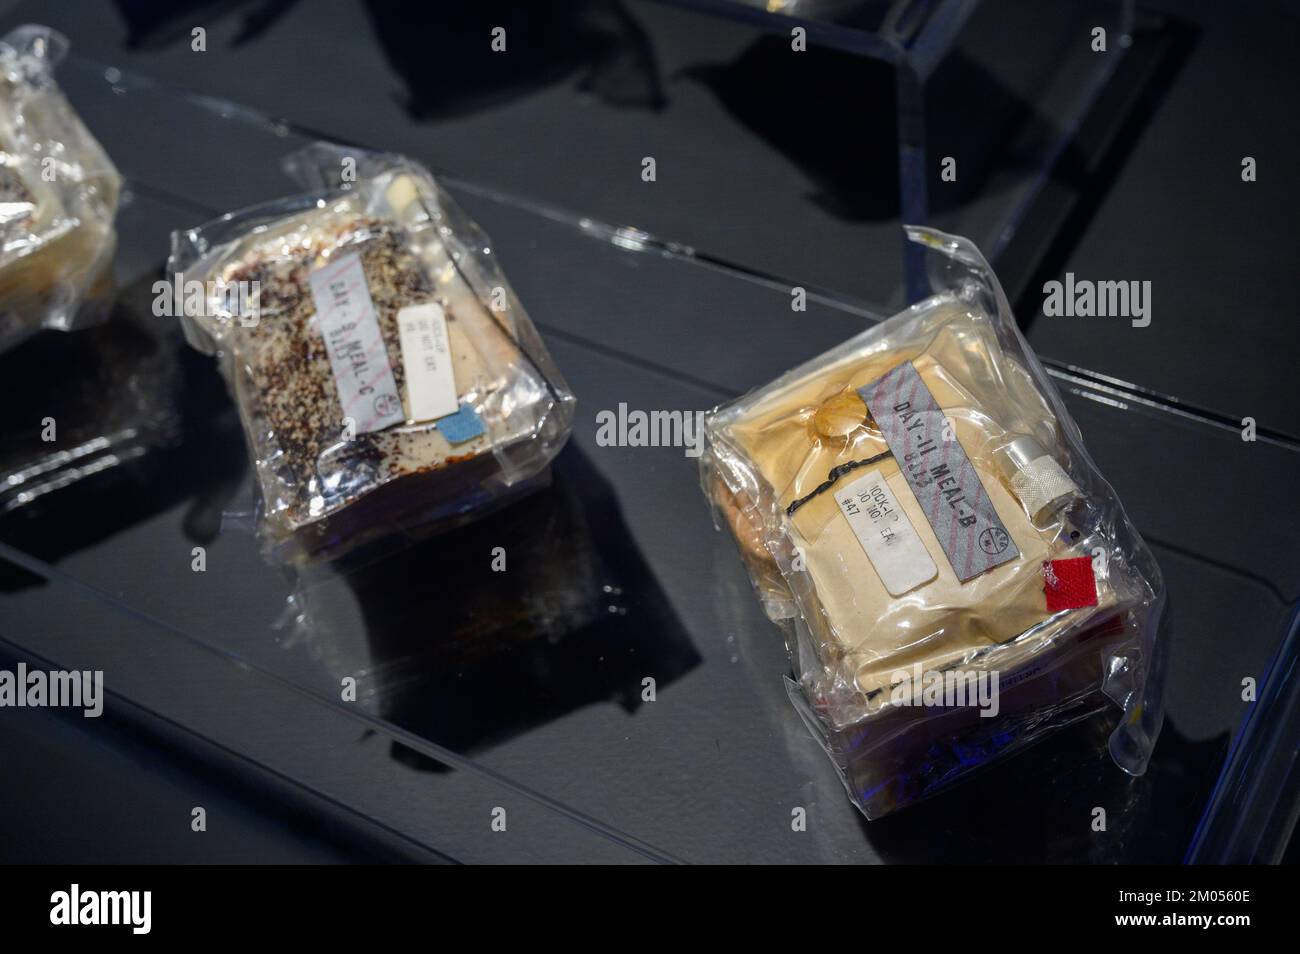 Space food packages from the Apollo era. The Cosmos Discovery exhibition in Slovakia. Stock Photo